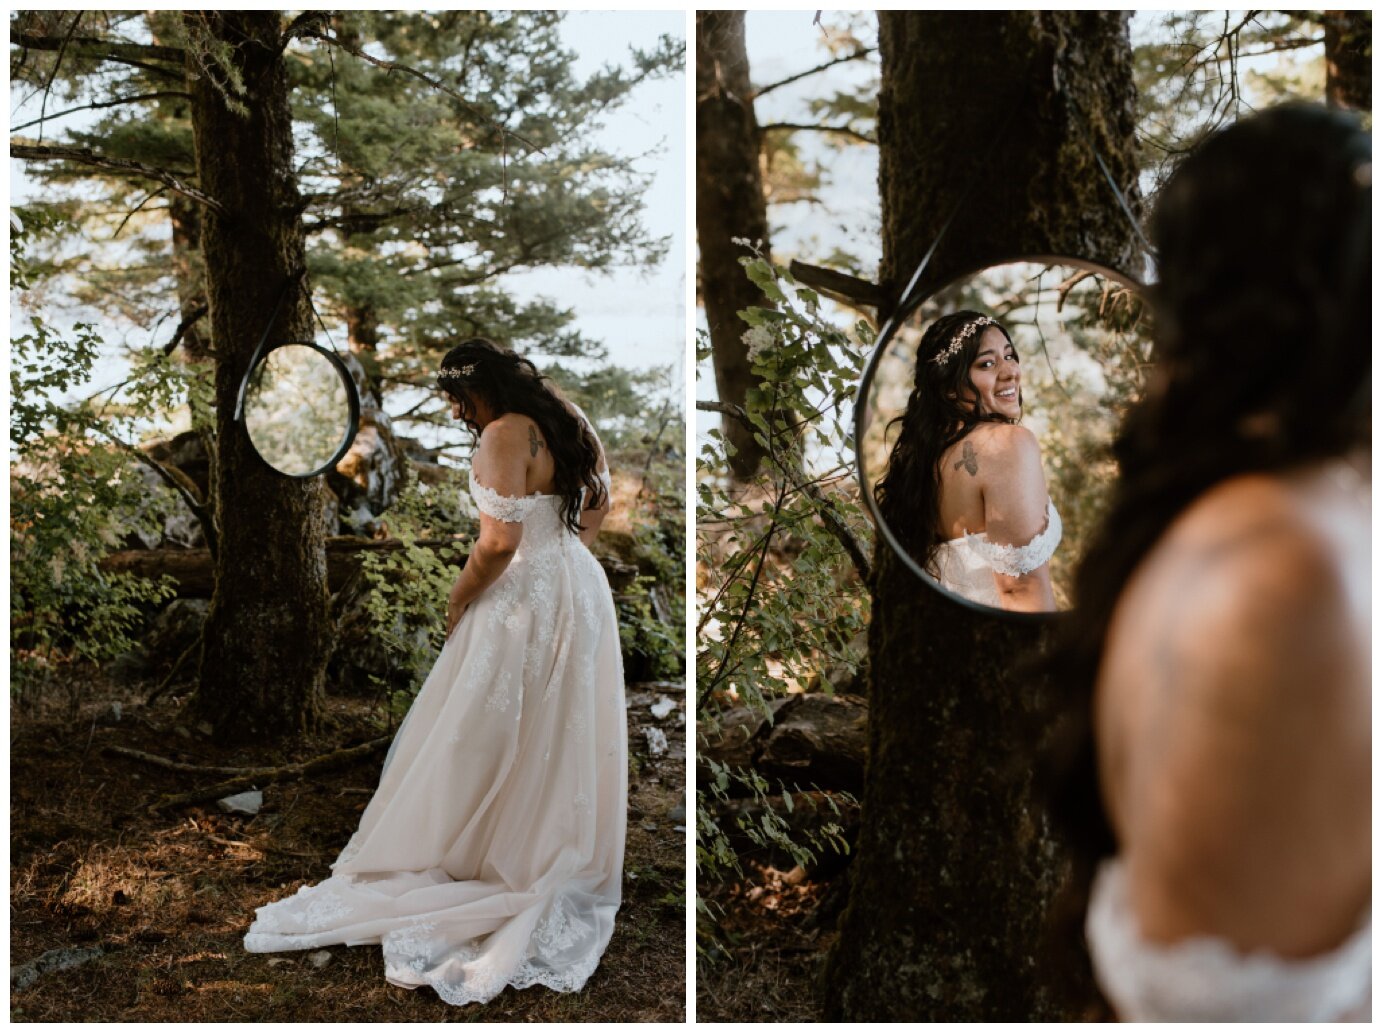 Elopement at Government Cove Peninsula - Madeline Rose Photography - PNW Elopement Photographer_0002.jpg